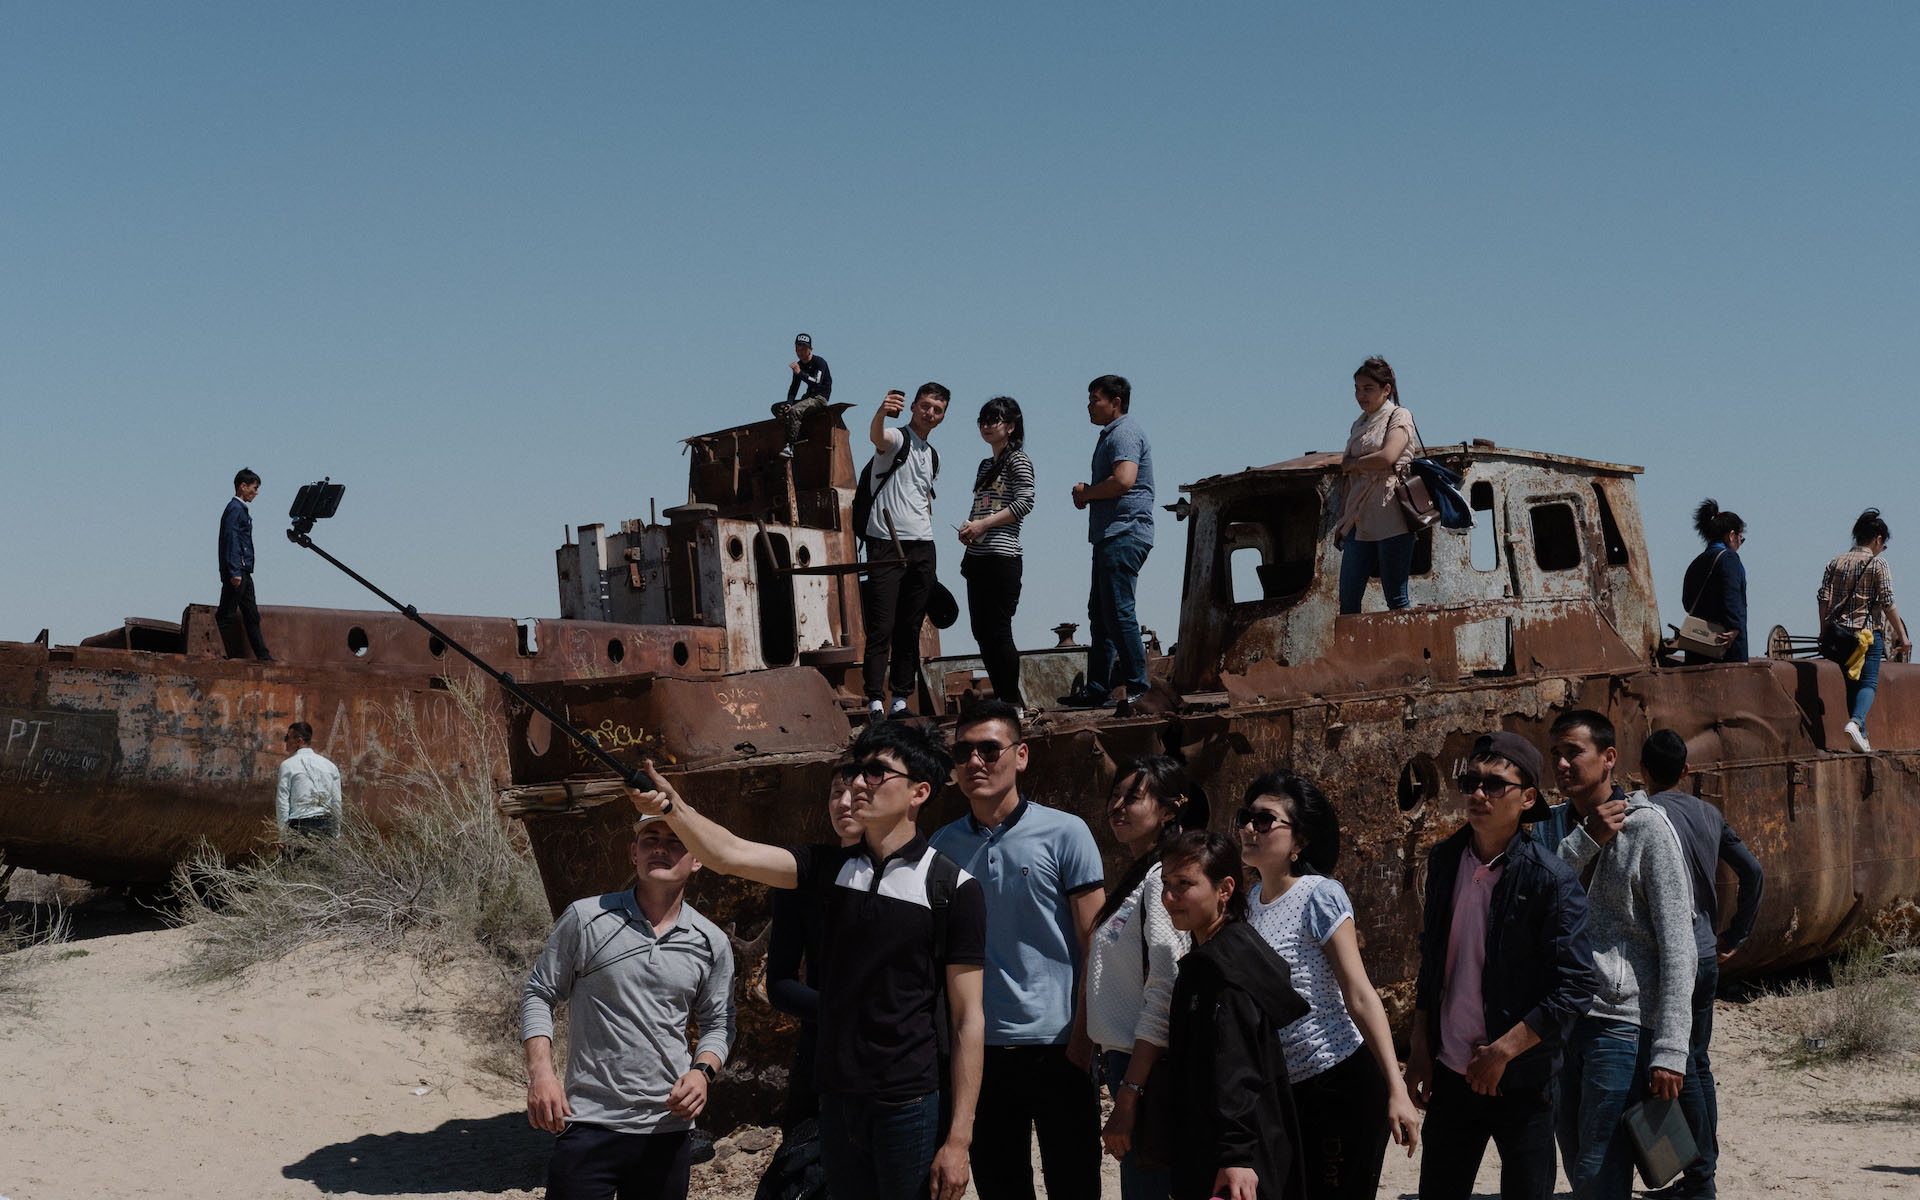 Selfie sticks at the Aral Sea: another example of disaster tourism’s self-indulgence?